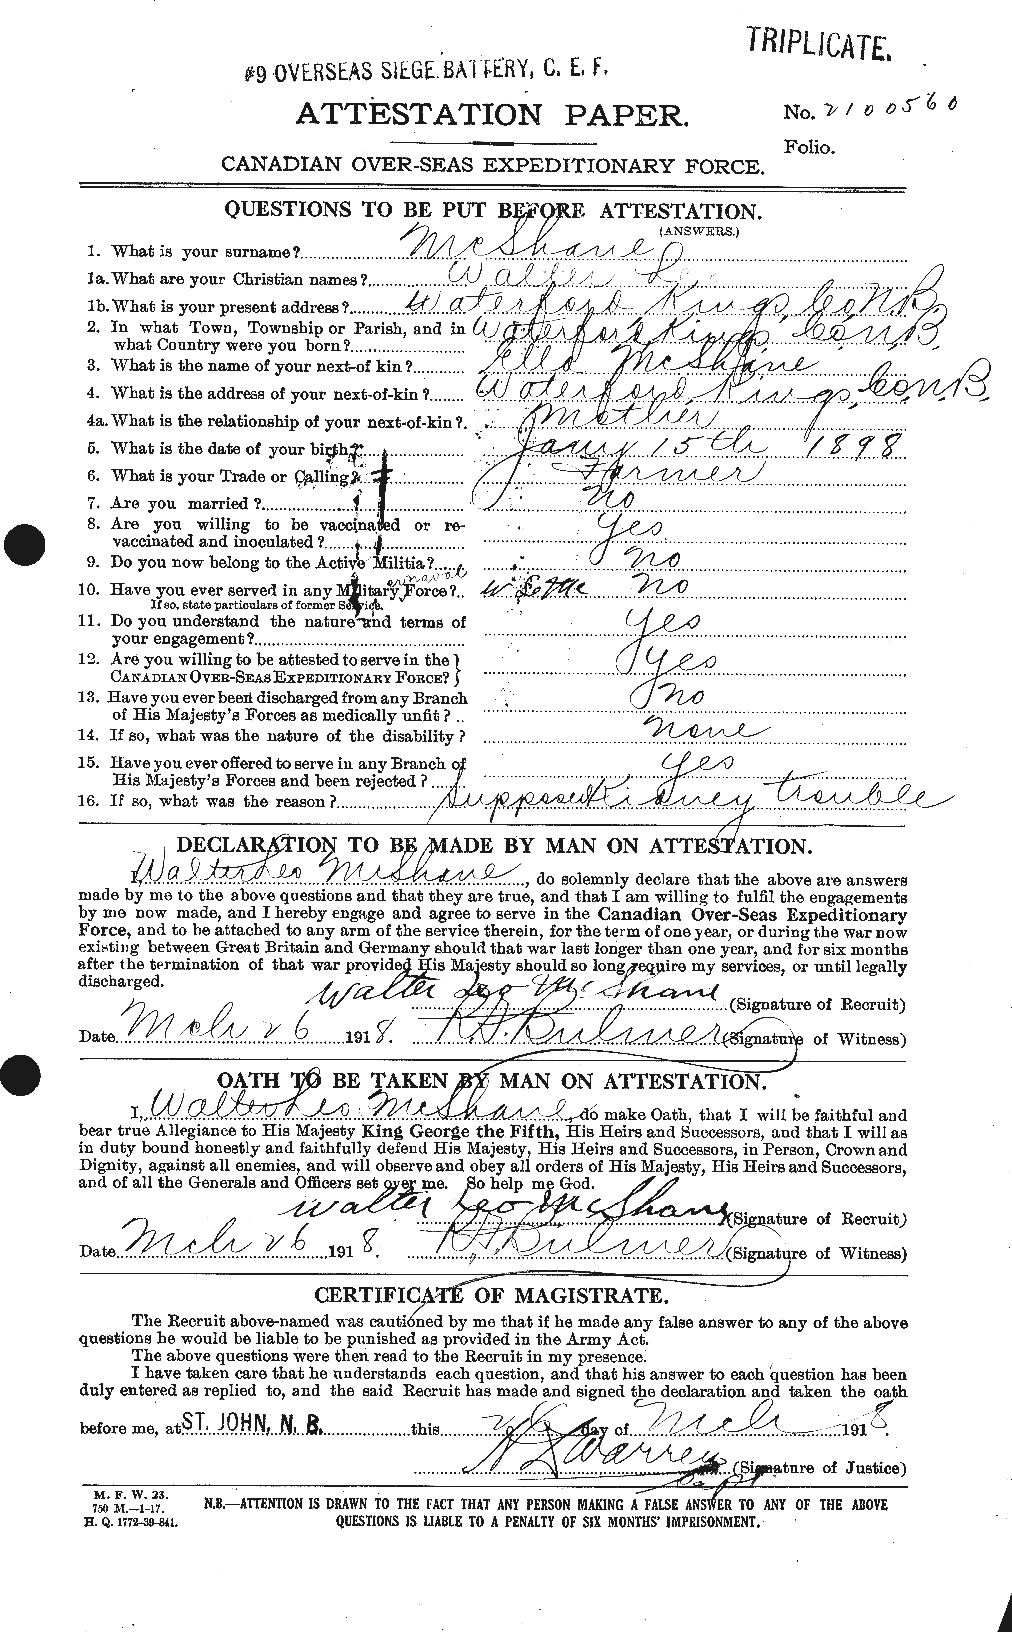 Personnel Records of the First World War - CEF 544814a